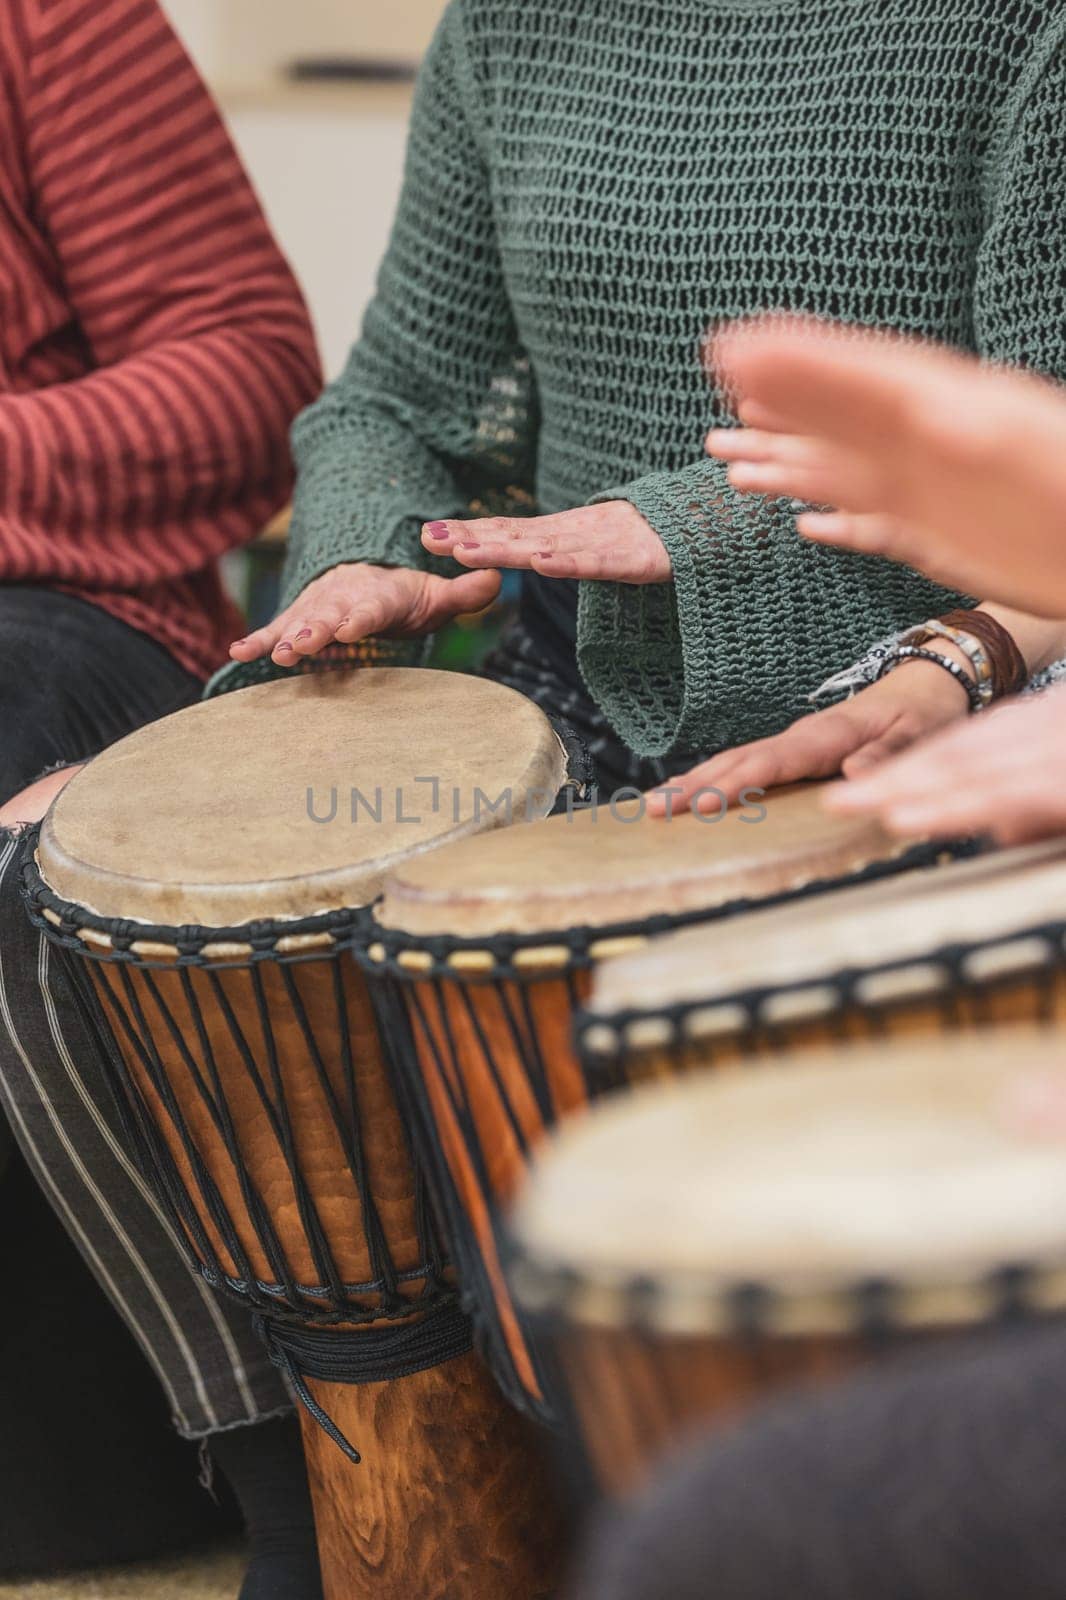 Group of people playing drums during music therapy lessons, jembe drum, drumming concept